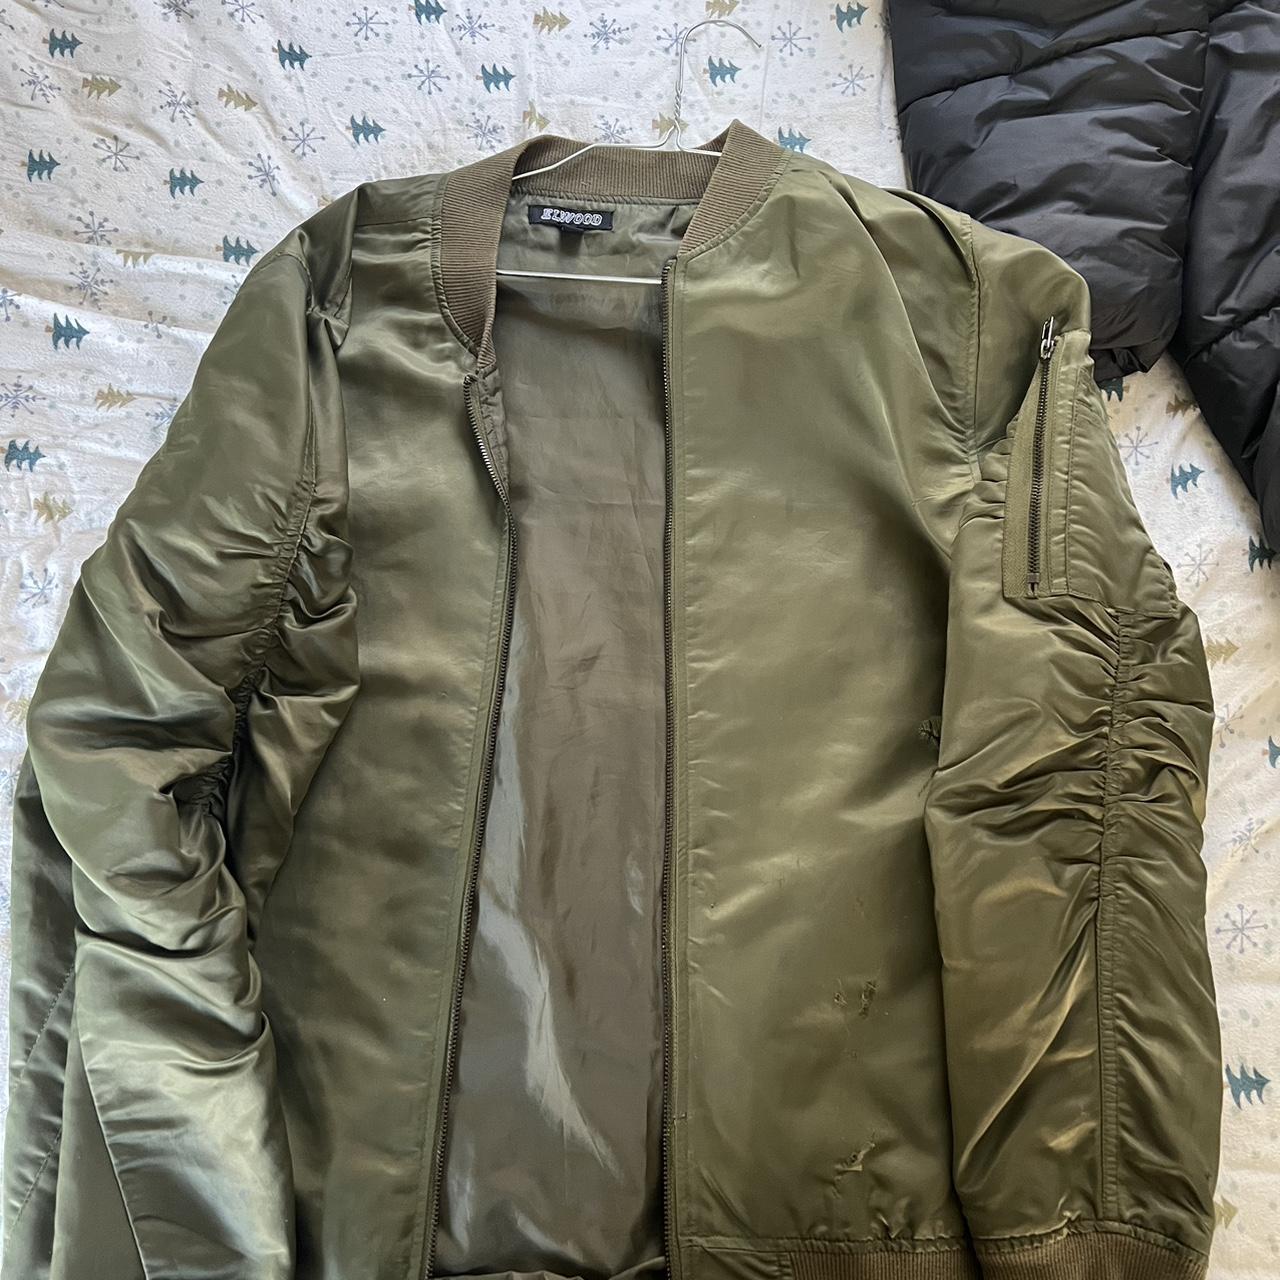 Jacket used with 2 rips - Depop